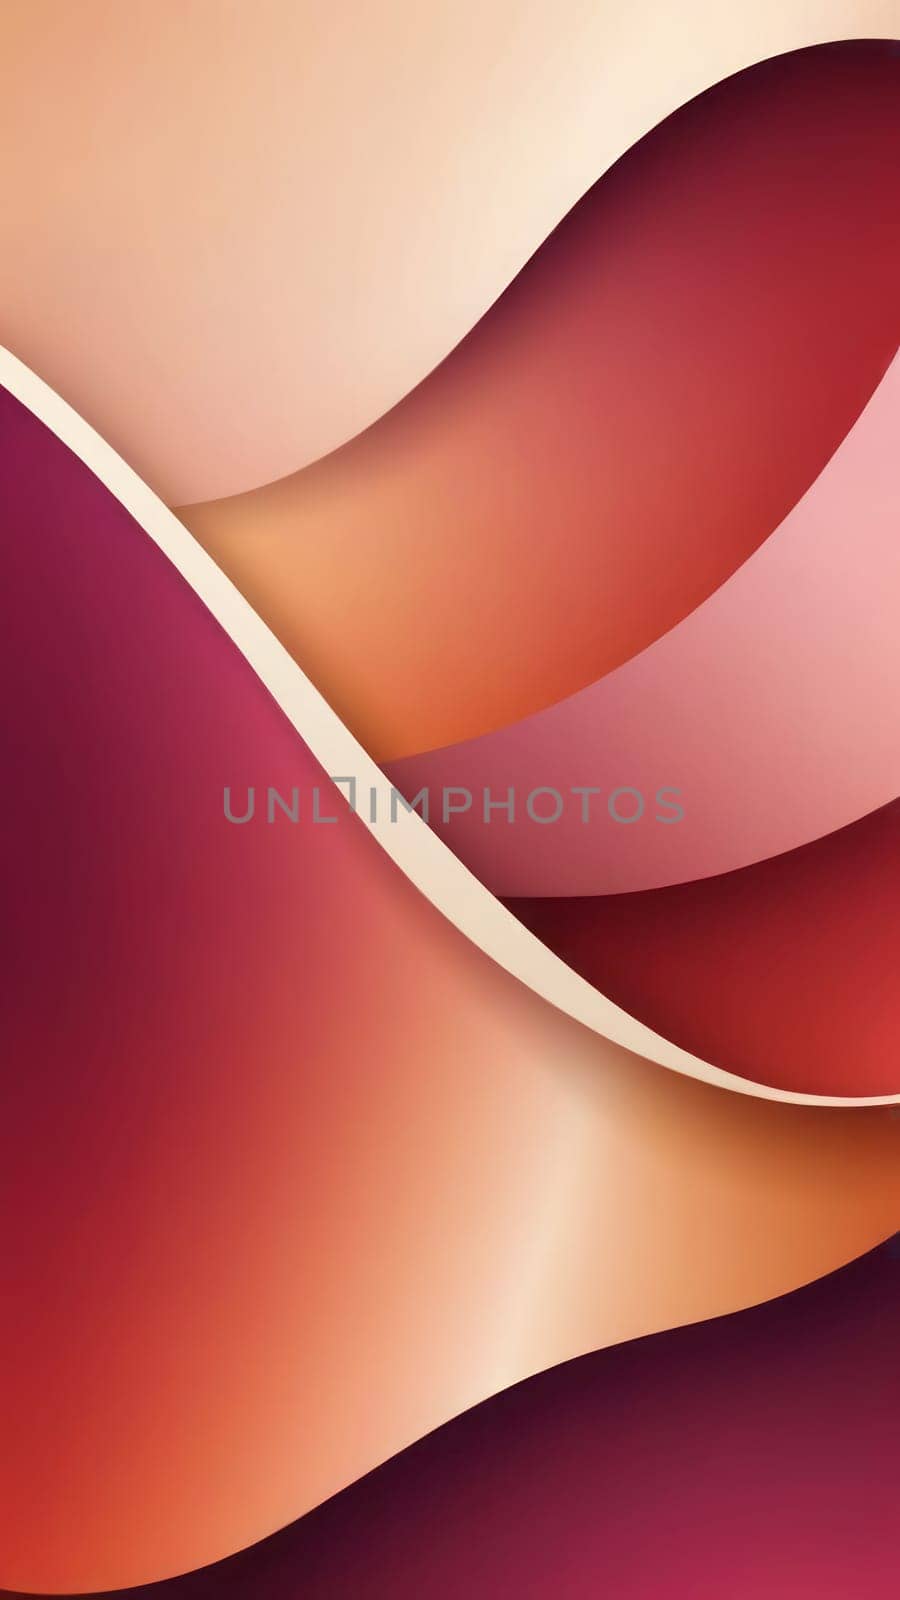 Screen background from Flared shapes and maroon by nkotlyar